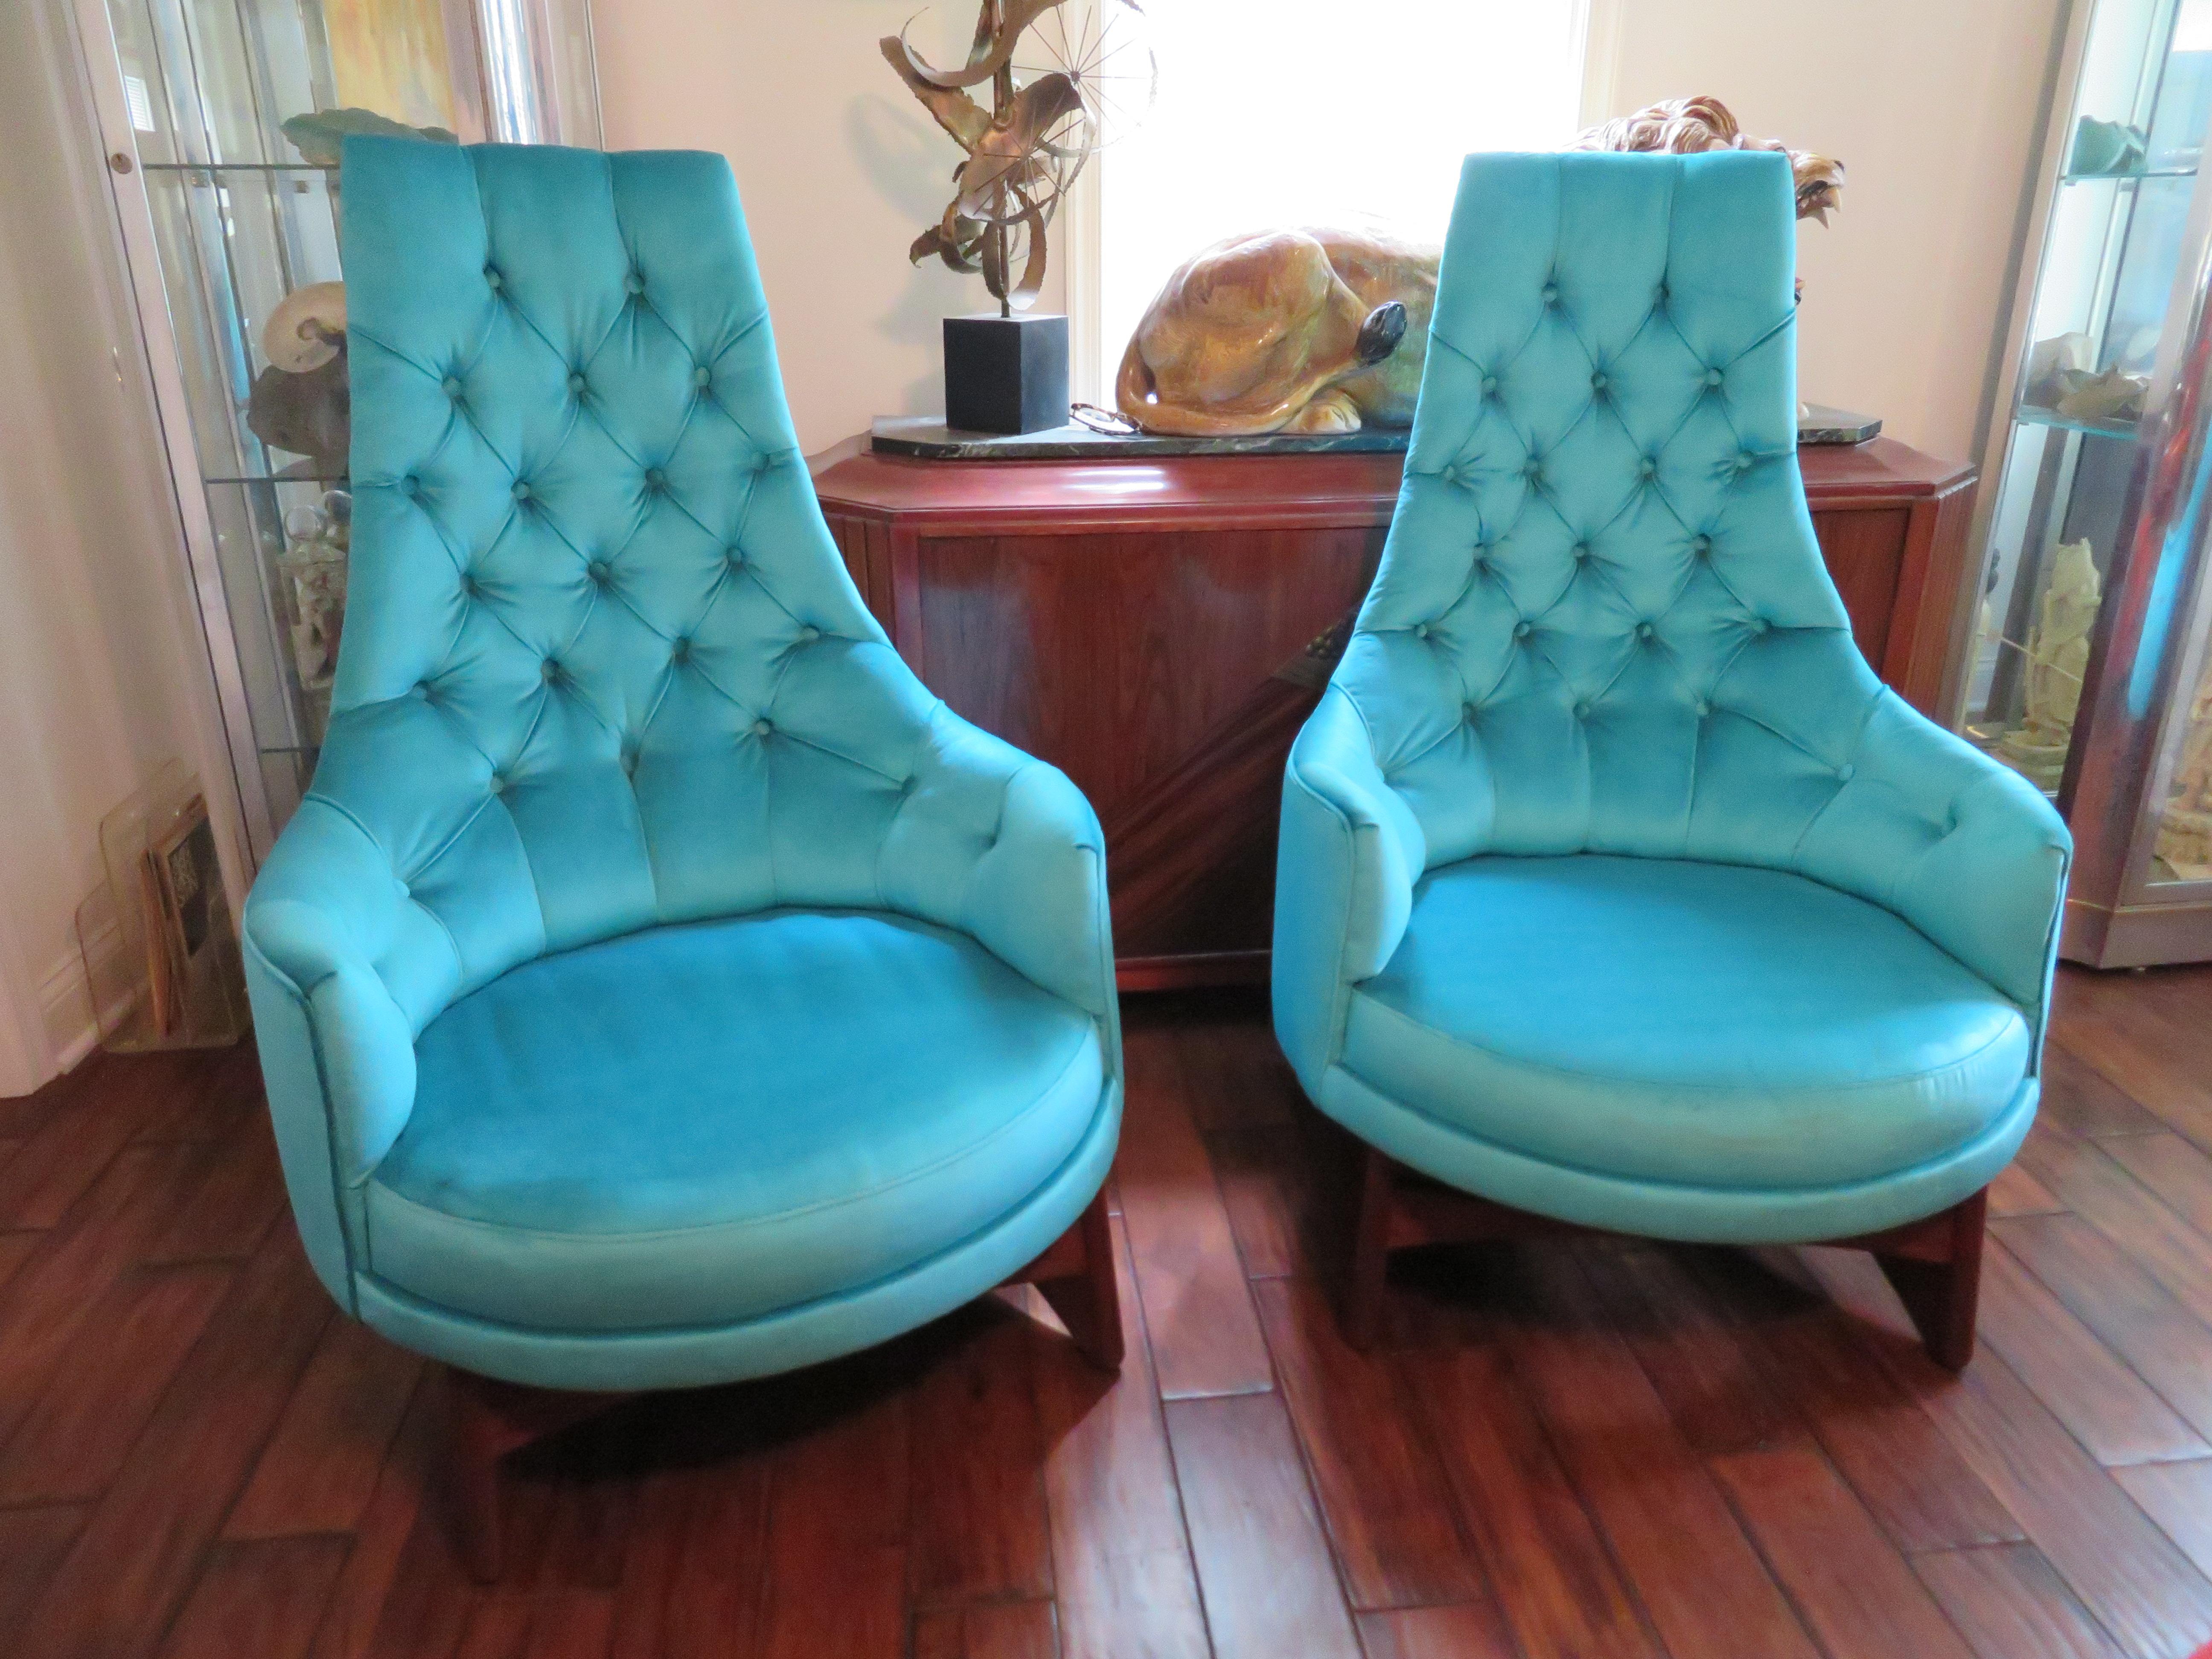 Fabulous pair of Adrian Pearsall tufted tall back lounge chairs. These are quite rare with the sculpted walnut bases and these have been totally restored to better than new condition. We used a high end turquoise velvet fabric and replaced all the